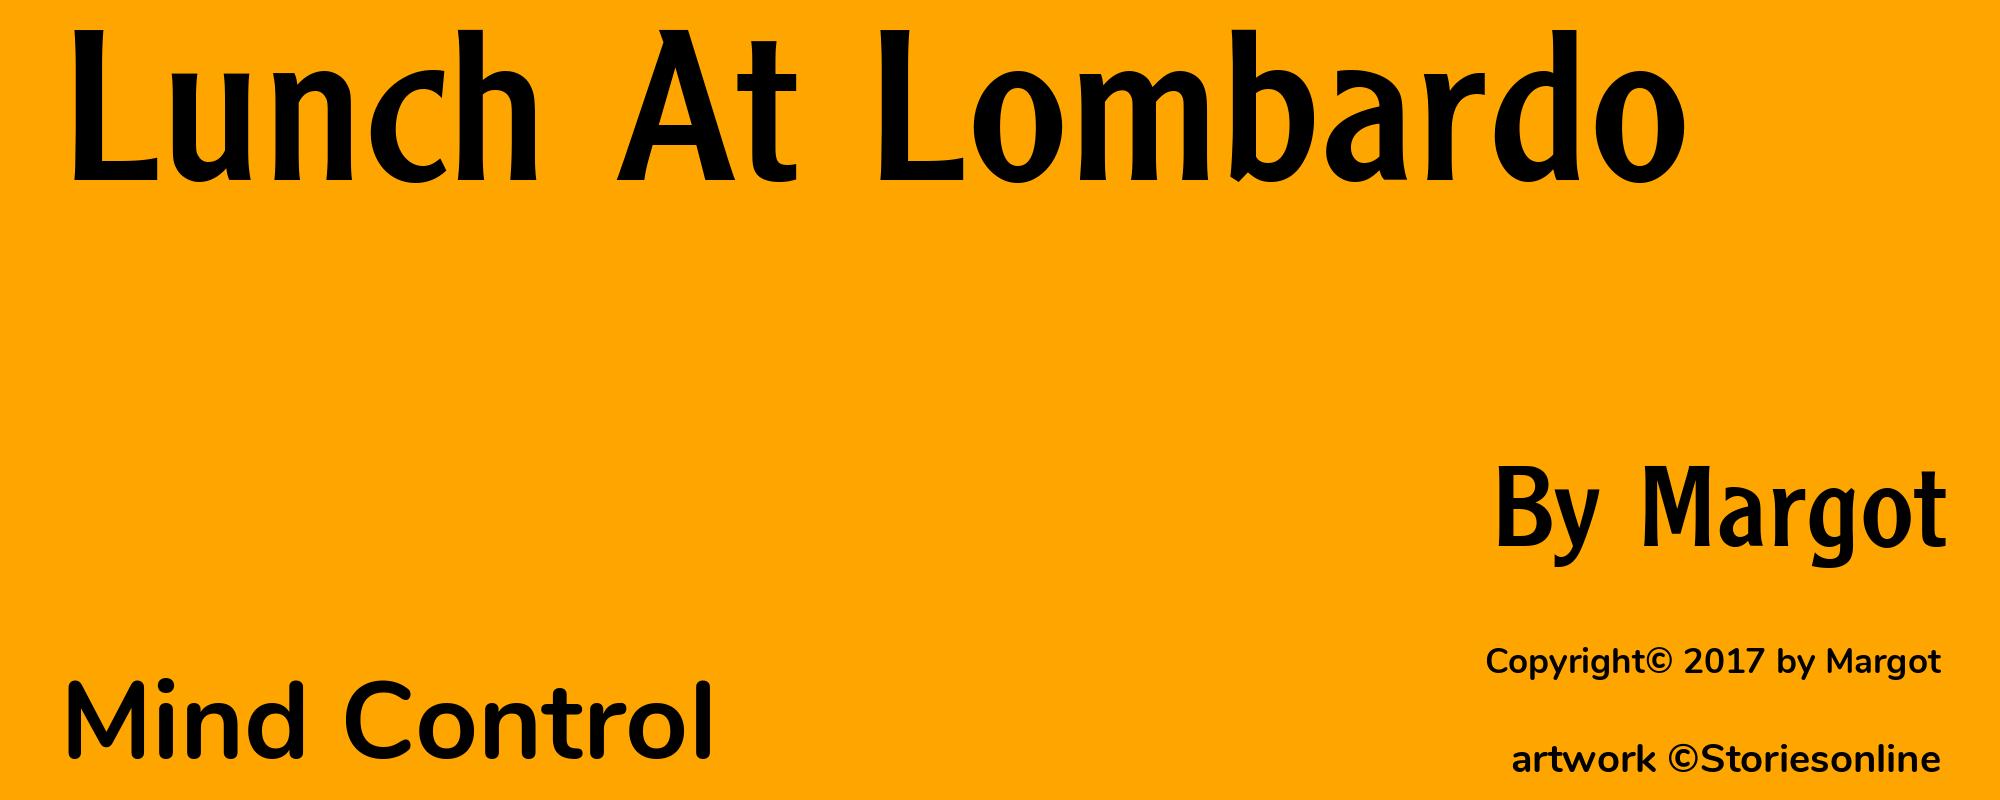 Lunch At Lombardo - Cover